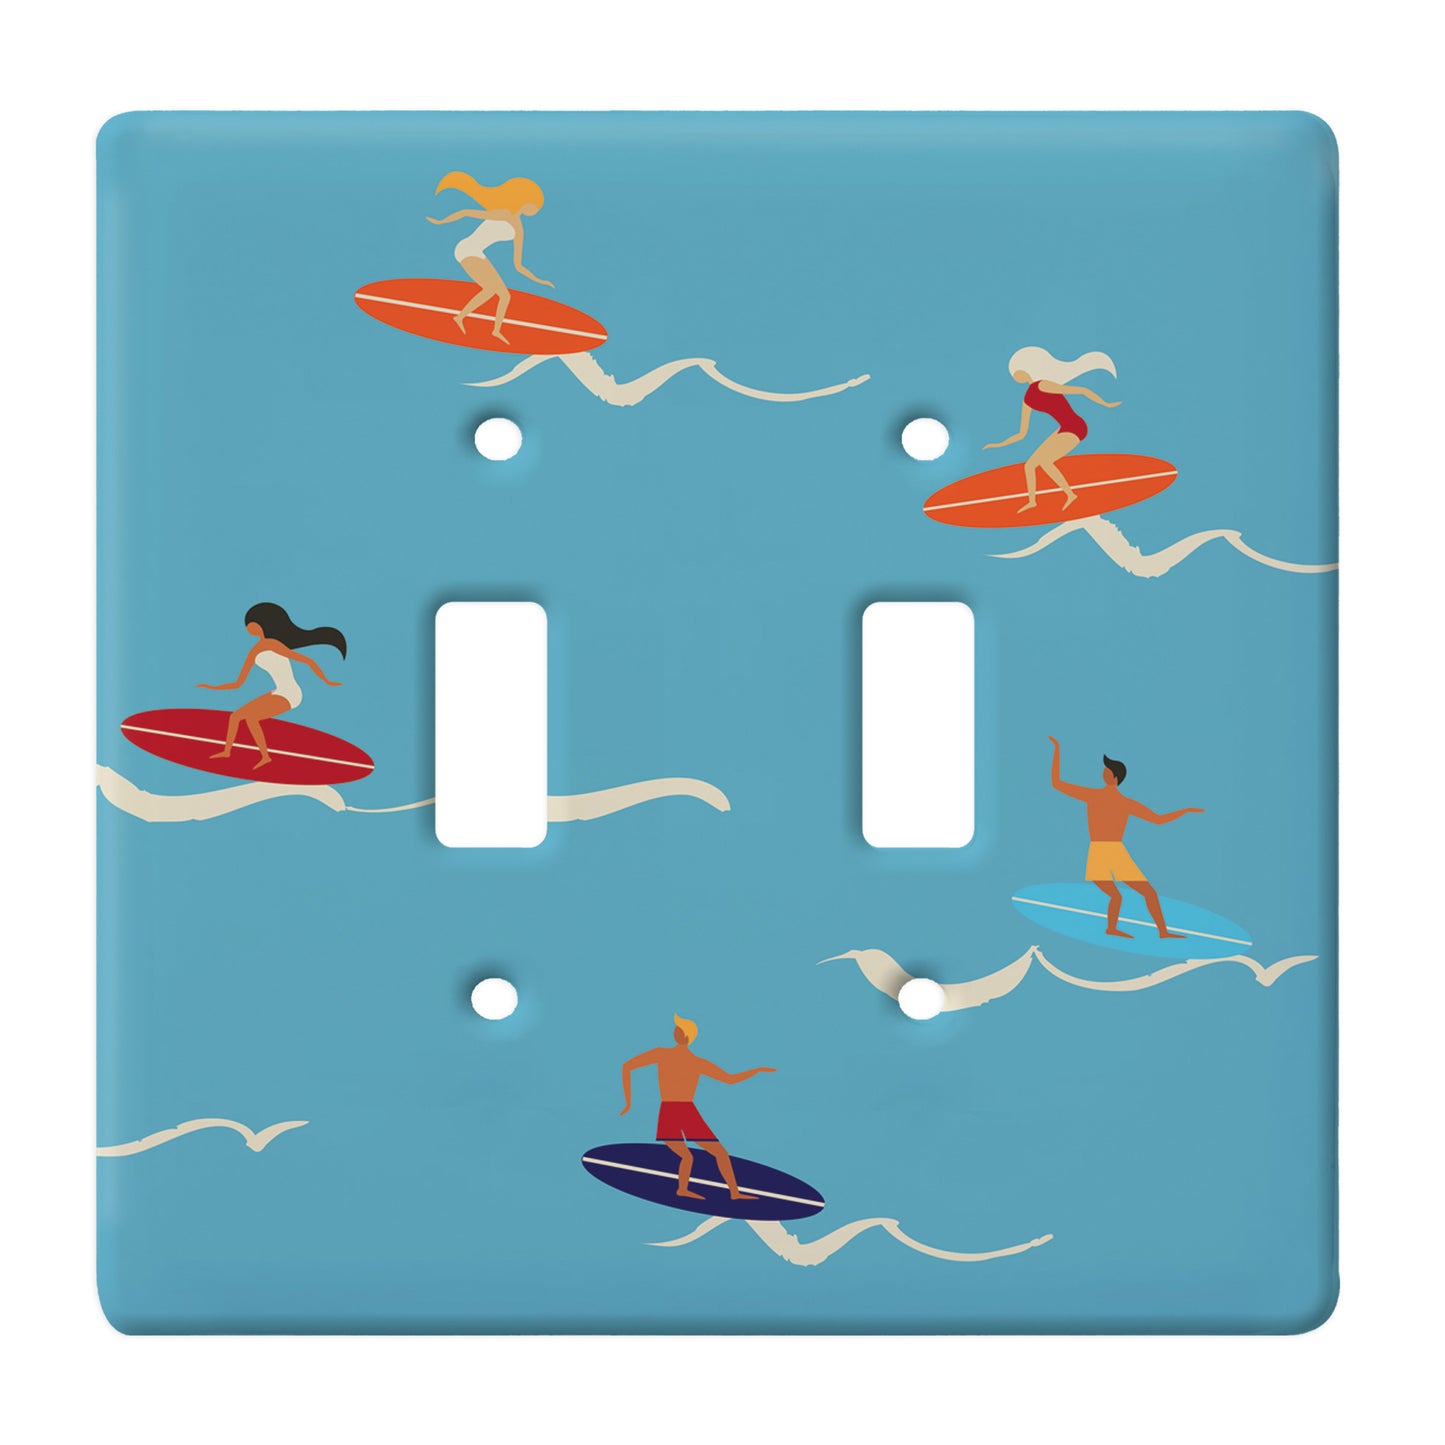 blue ceramic double toggle switch plate featuring 5 surfers with various colored surf boards.